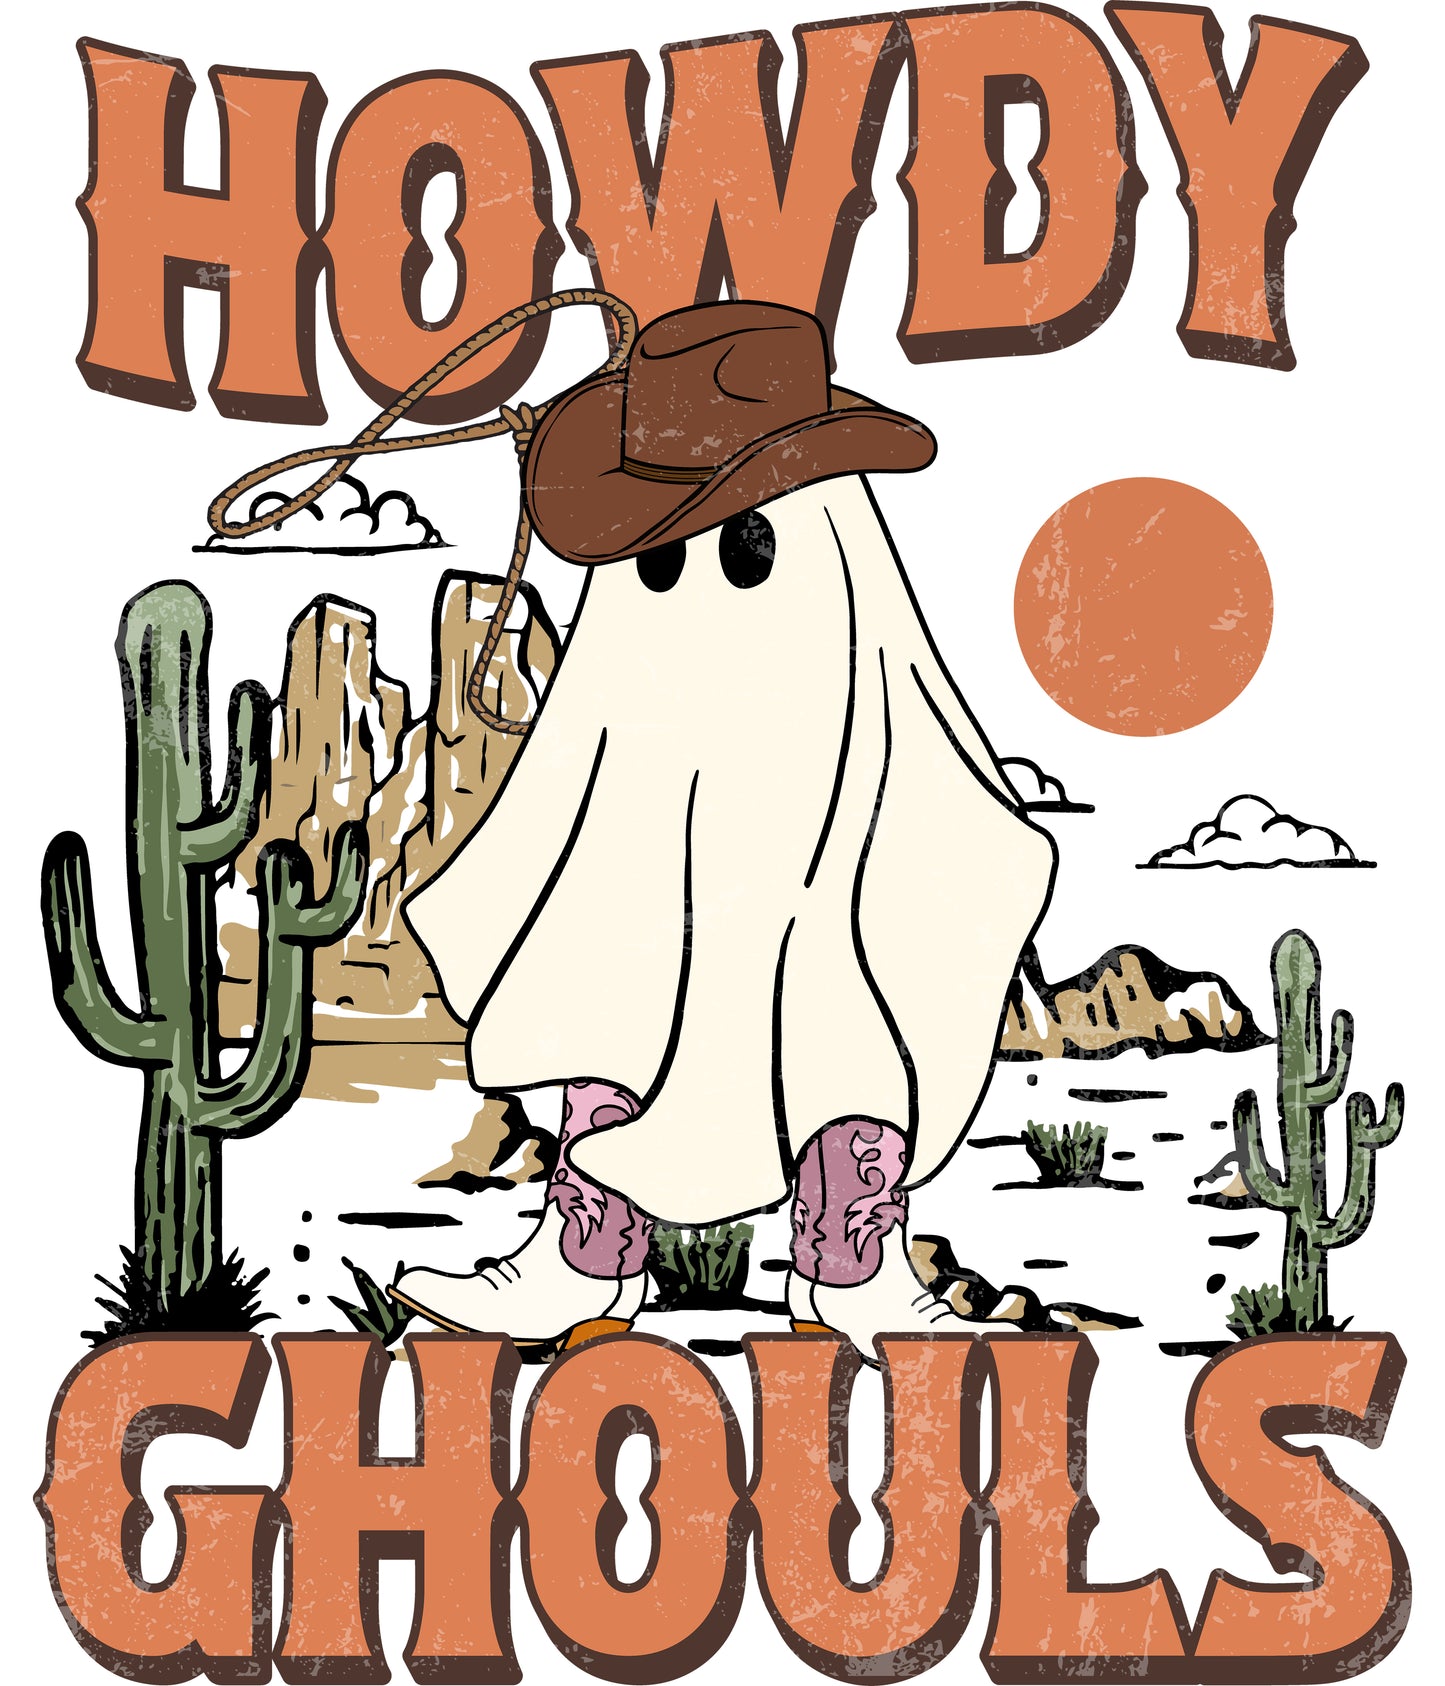 Howdy Ghouls